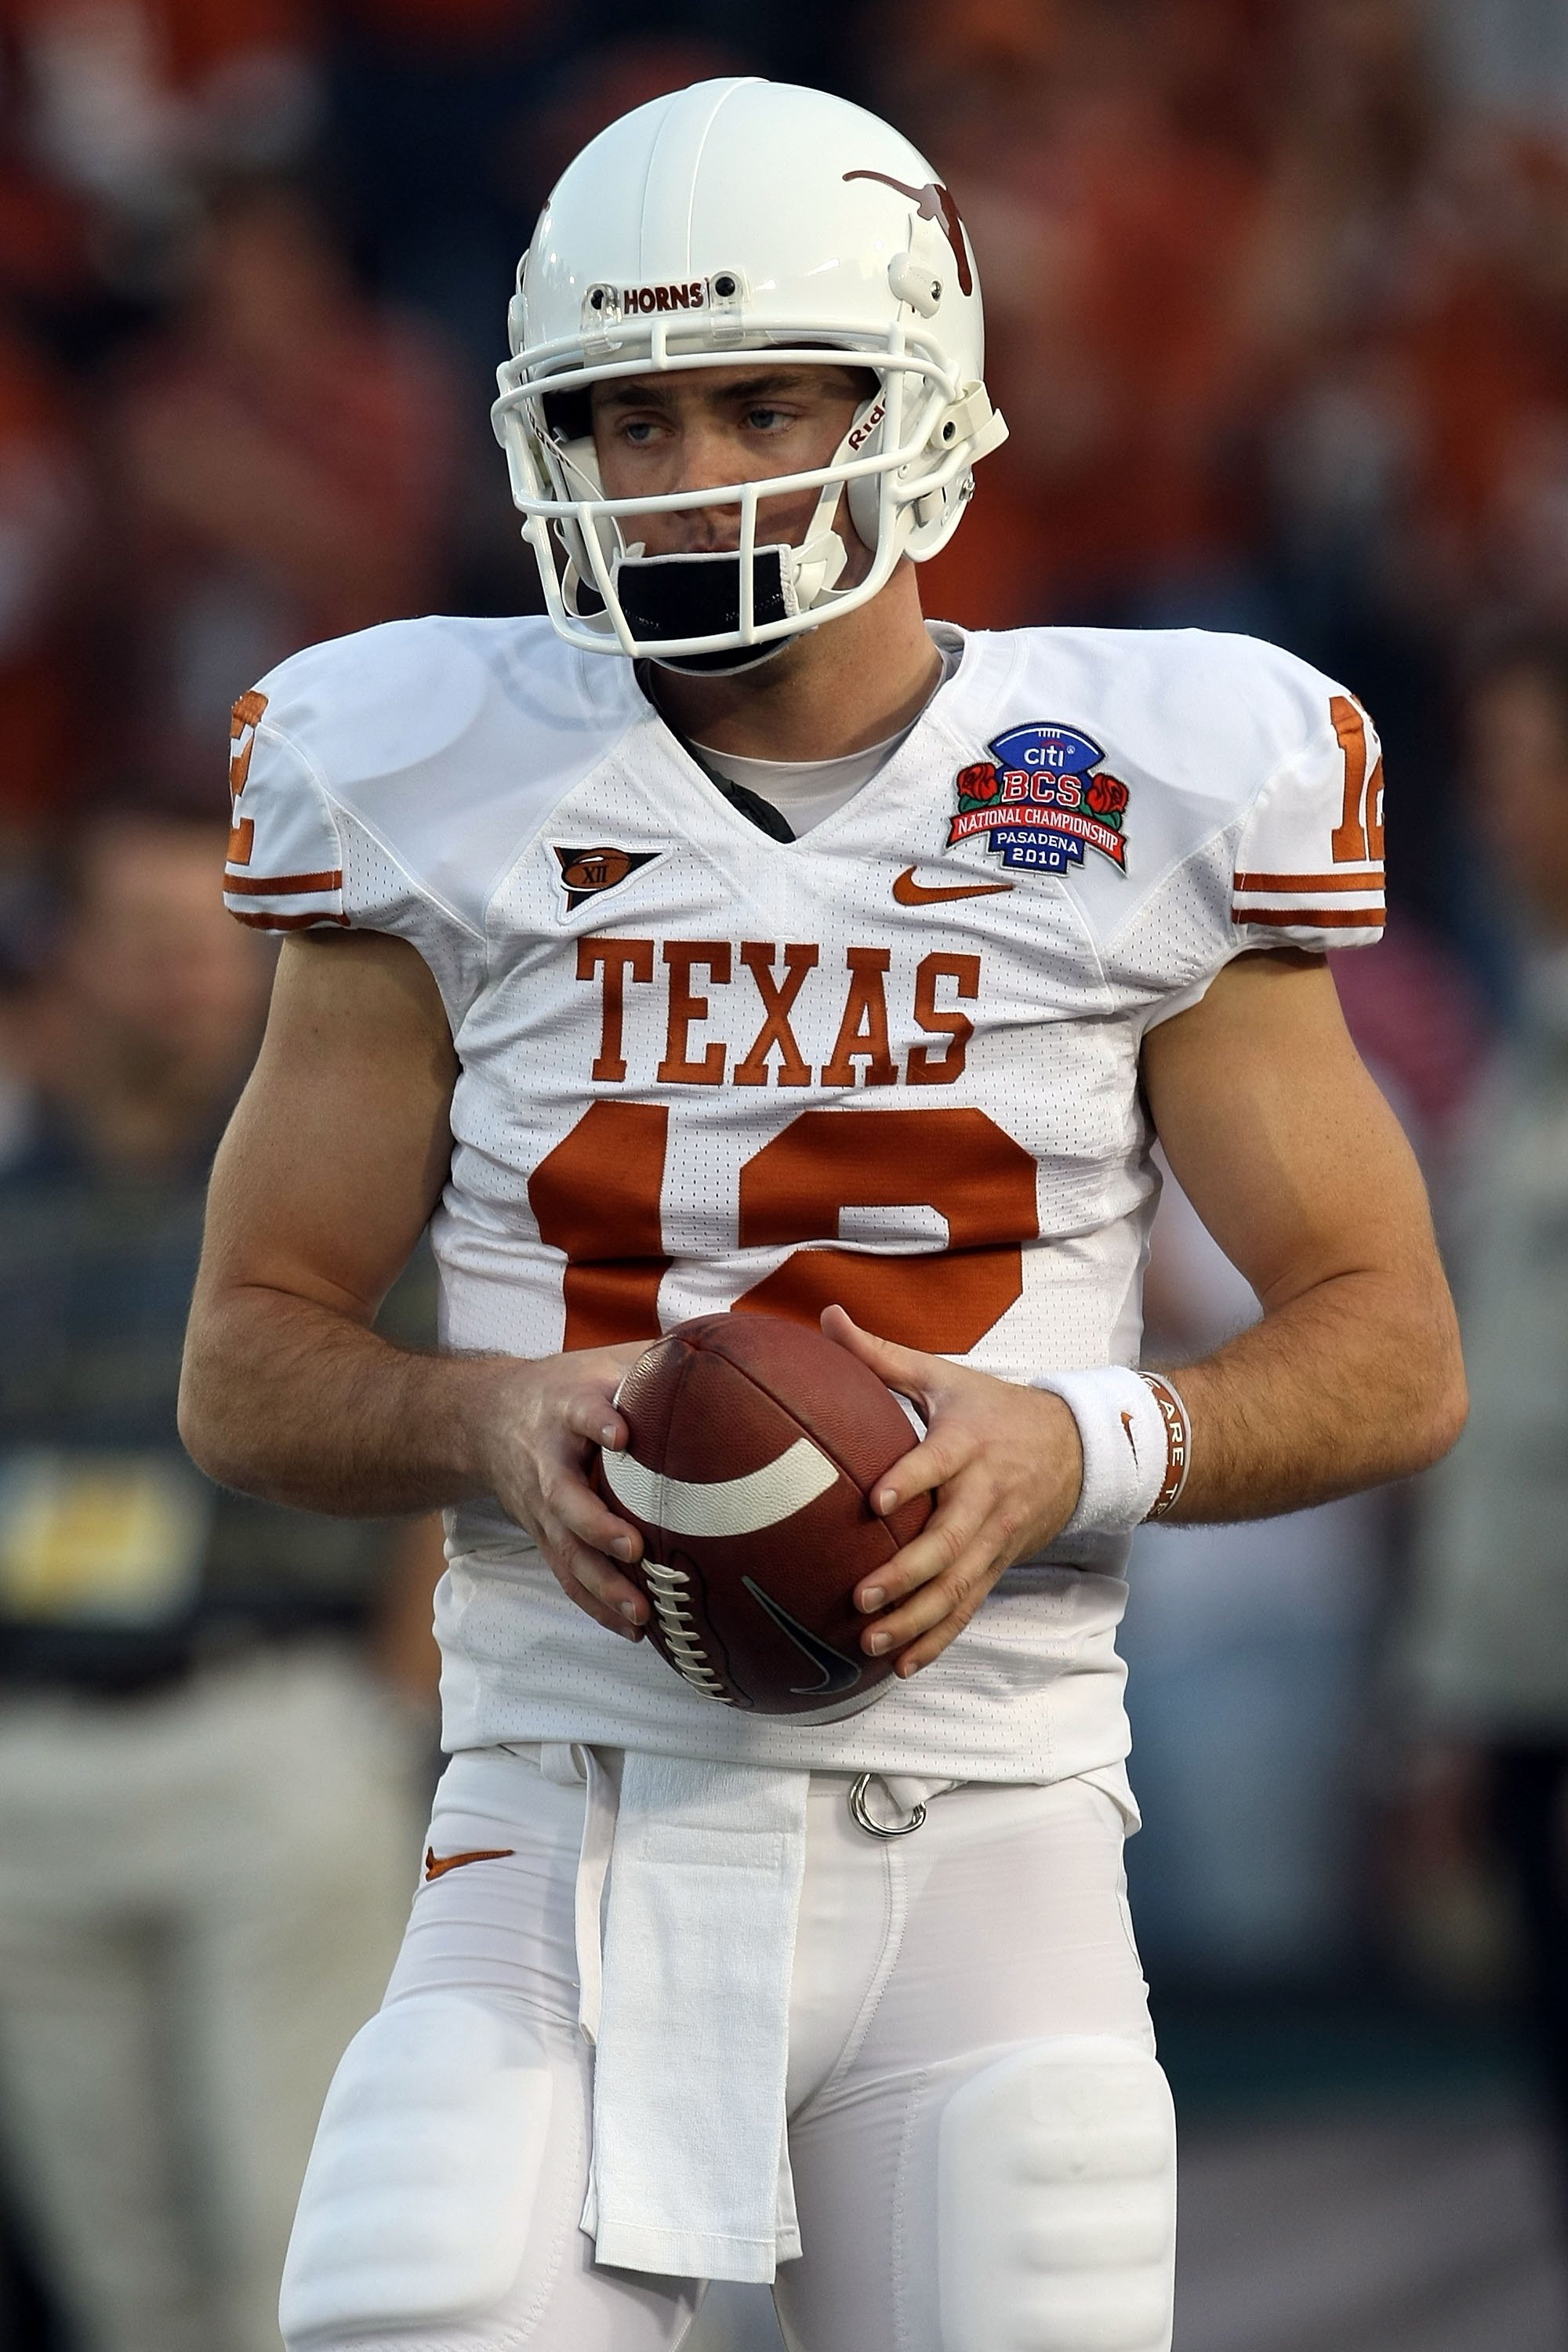 Texas Football's Decade of Dominance The Top 10 Longhorns From 2001